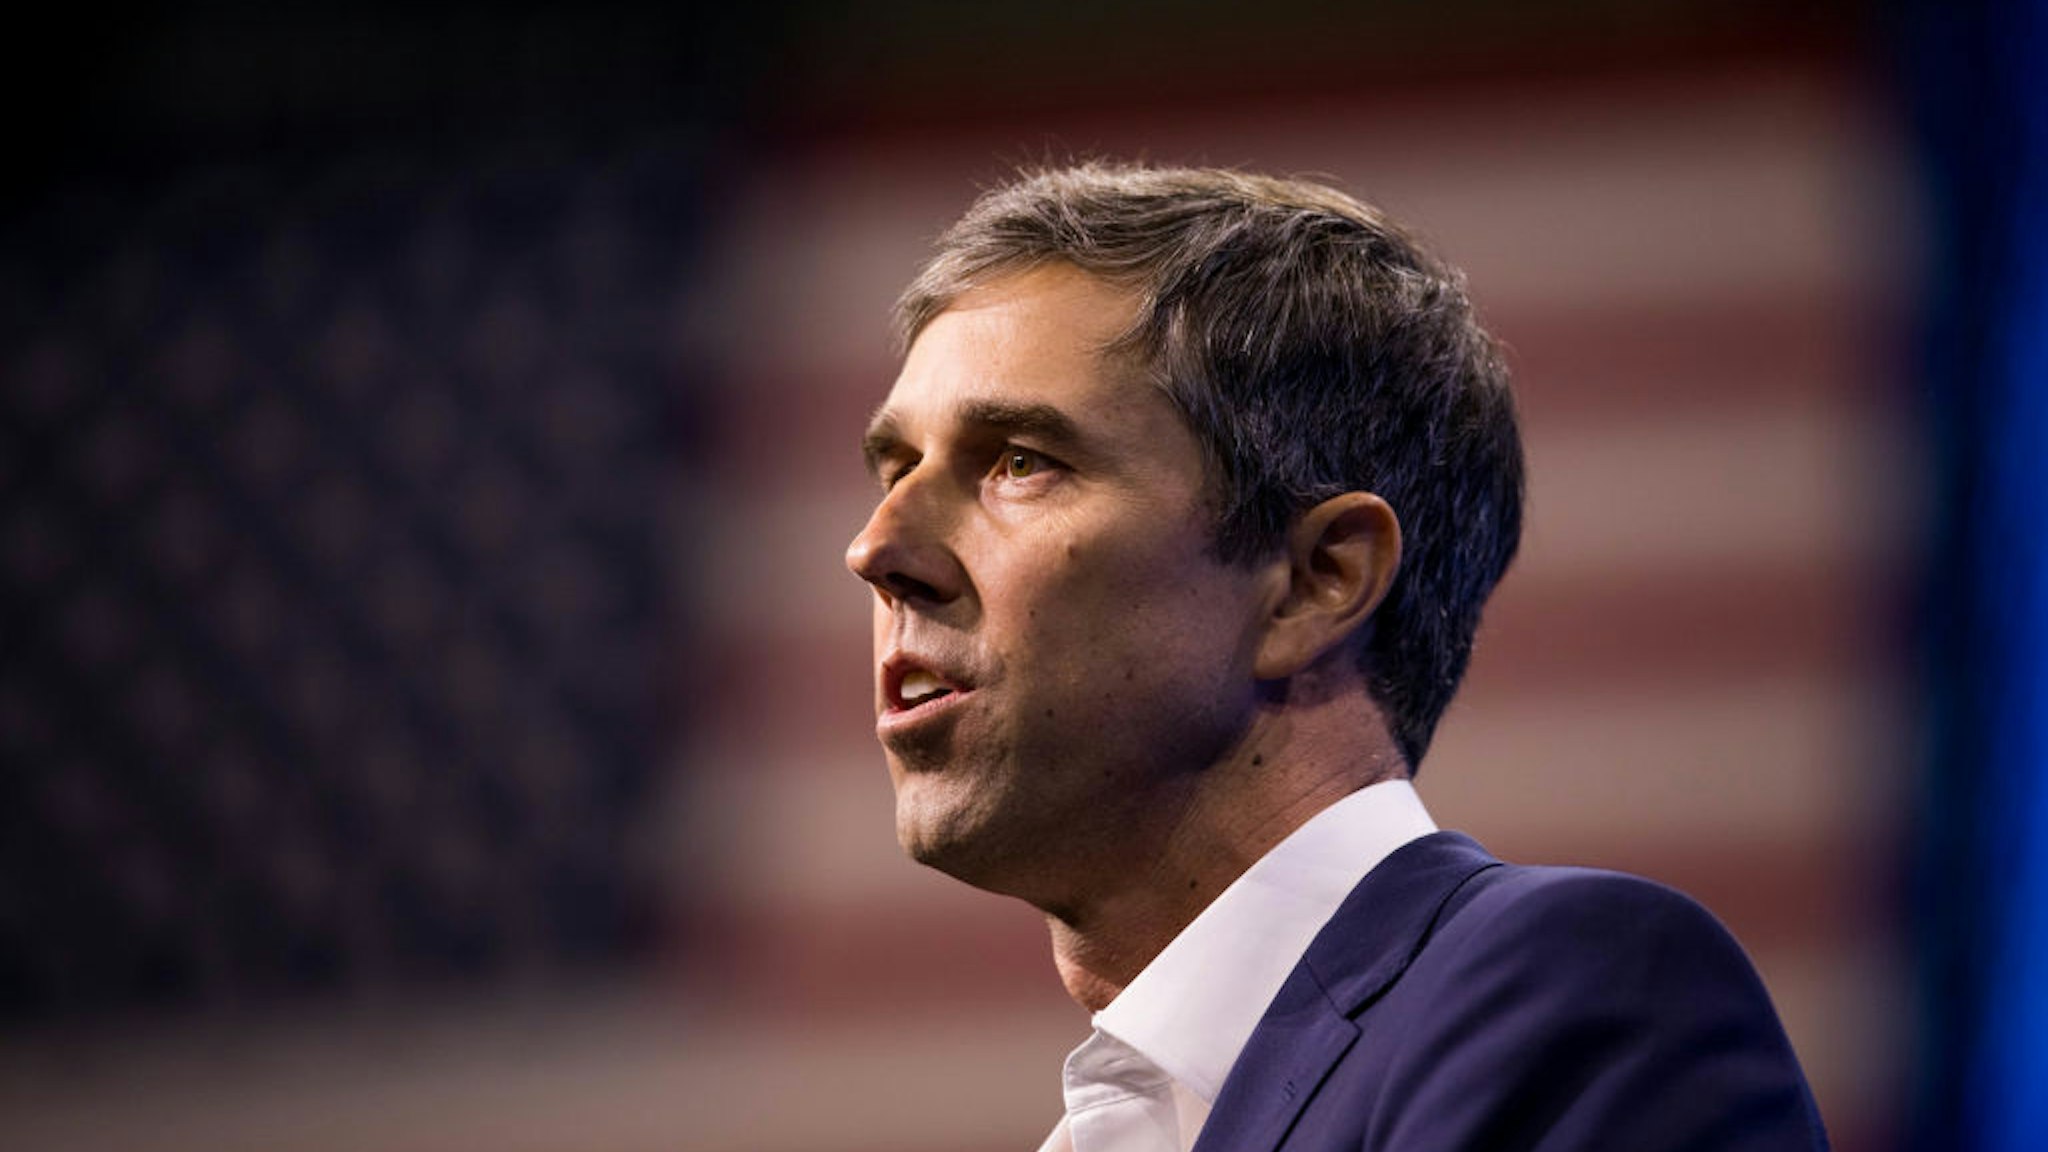 MANCHESTER, NH - SEPTEMBER 07: Democratic presidential candidate, former Rep. Beto O'Rourke (D-TX) speaks during the New Hampshire Democratic Party Convention at the SNHU Arena on September 7, 2019 in Manchester, New Hampshire. Nineteen presidential candidates will be attending the New Hampshire Democratic Party convention for the state's first cattle call before the 2020 primaries.